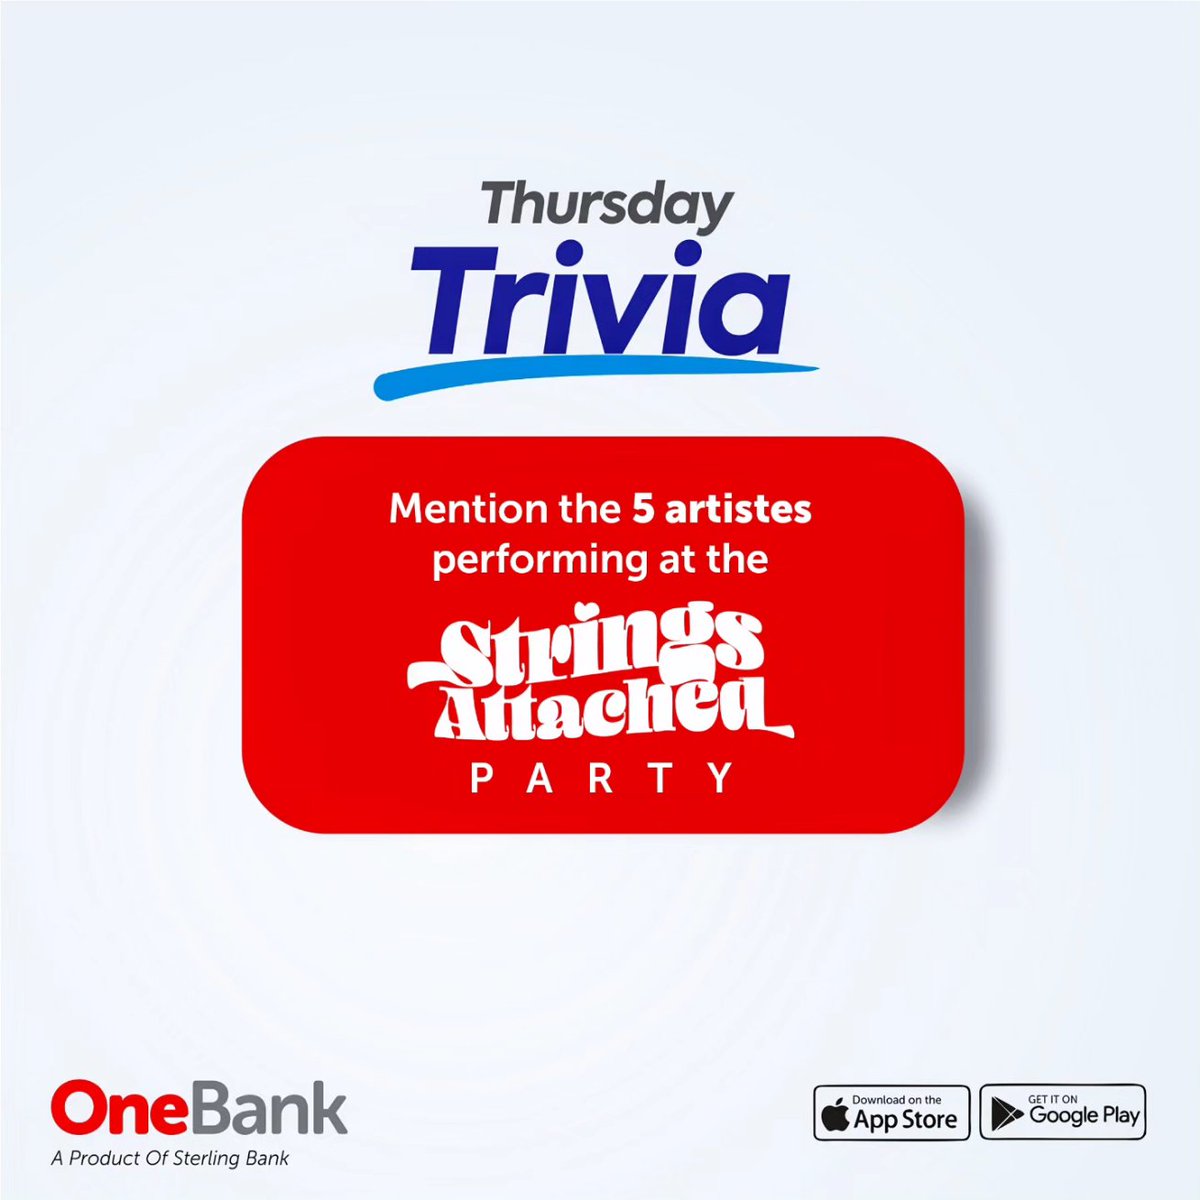 It's Trivia Thursday!🥳 Read the rules and swipe for this week’s question. Remember, fastest fingers first 😉 #OneBank #ANewWayToLive #OneBankBySterling